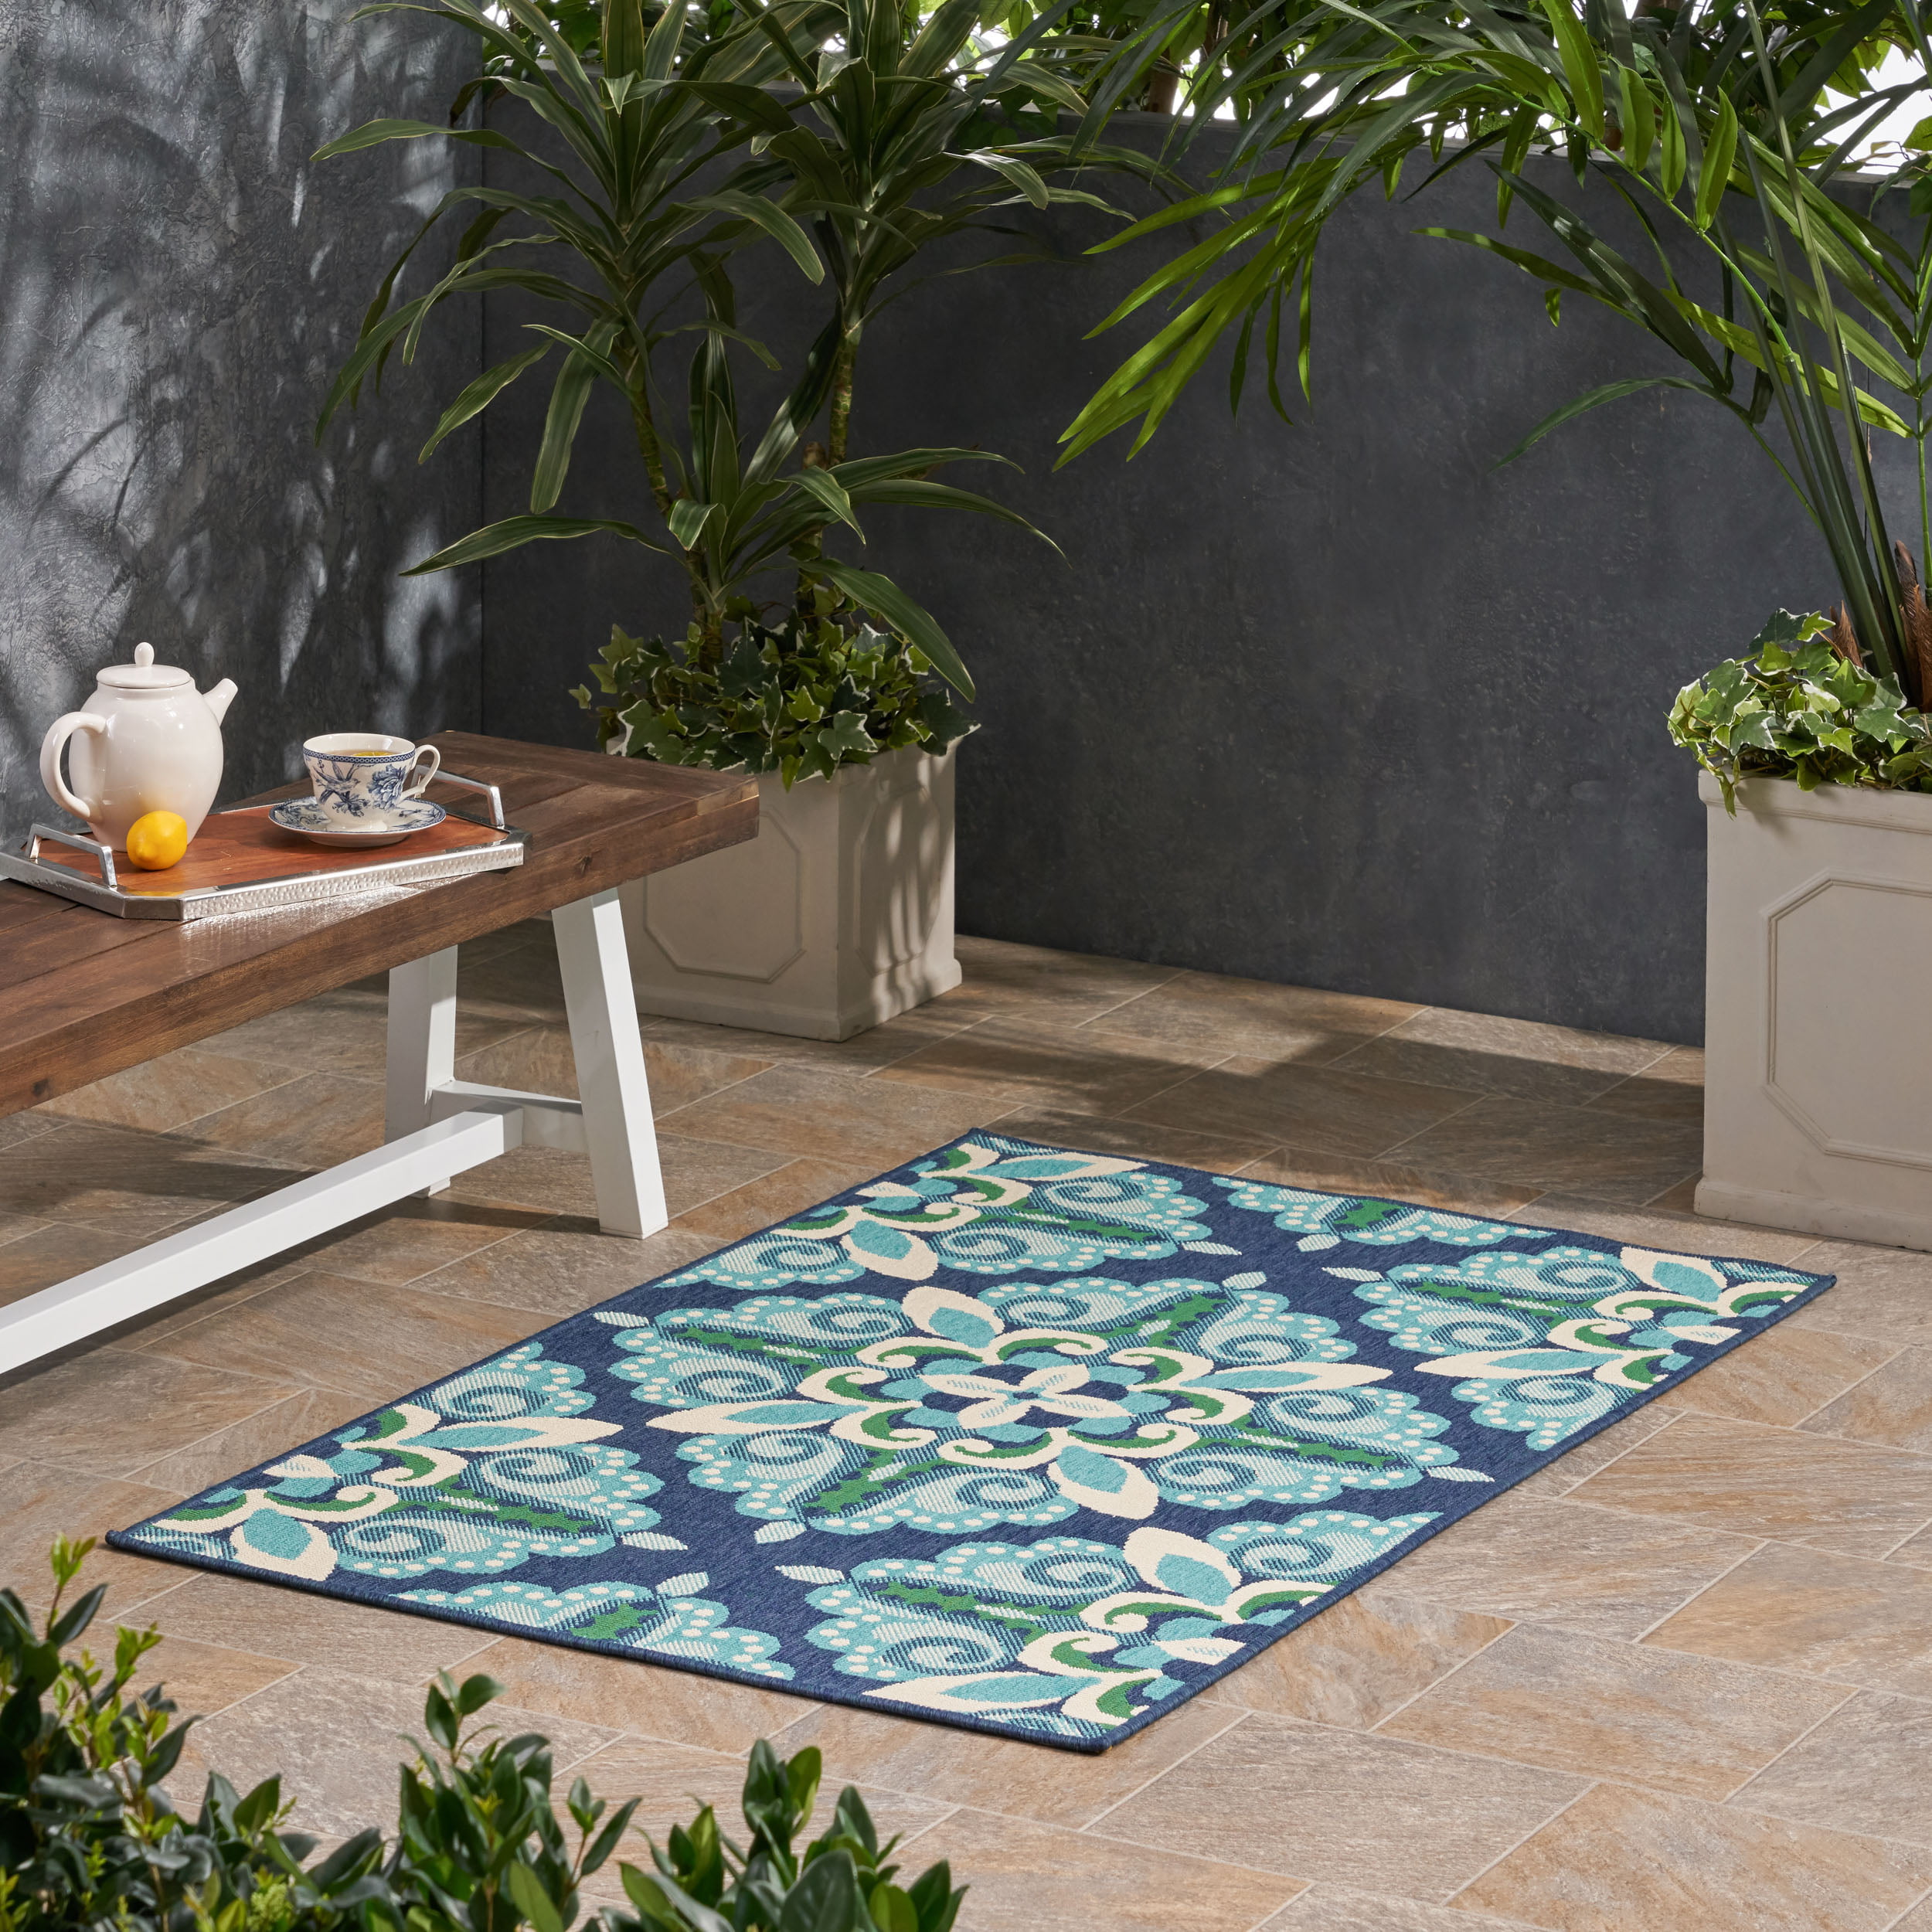 Sage Outdoor 3'3" x 5' Medallion Area Rug, Blue and Green